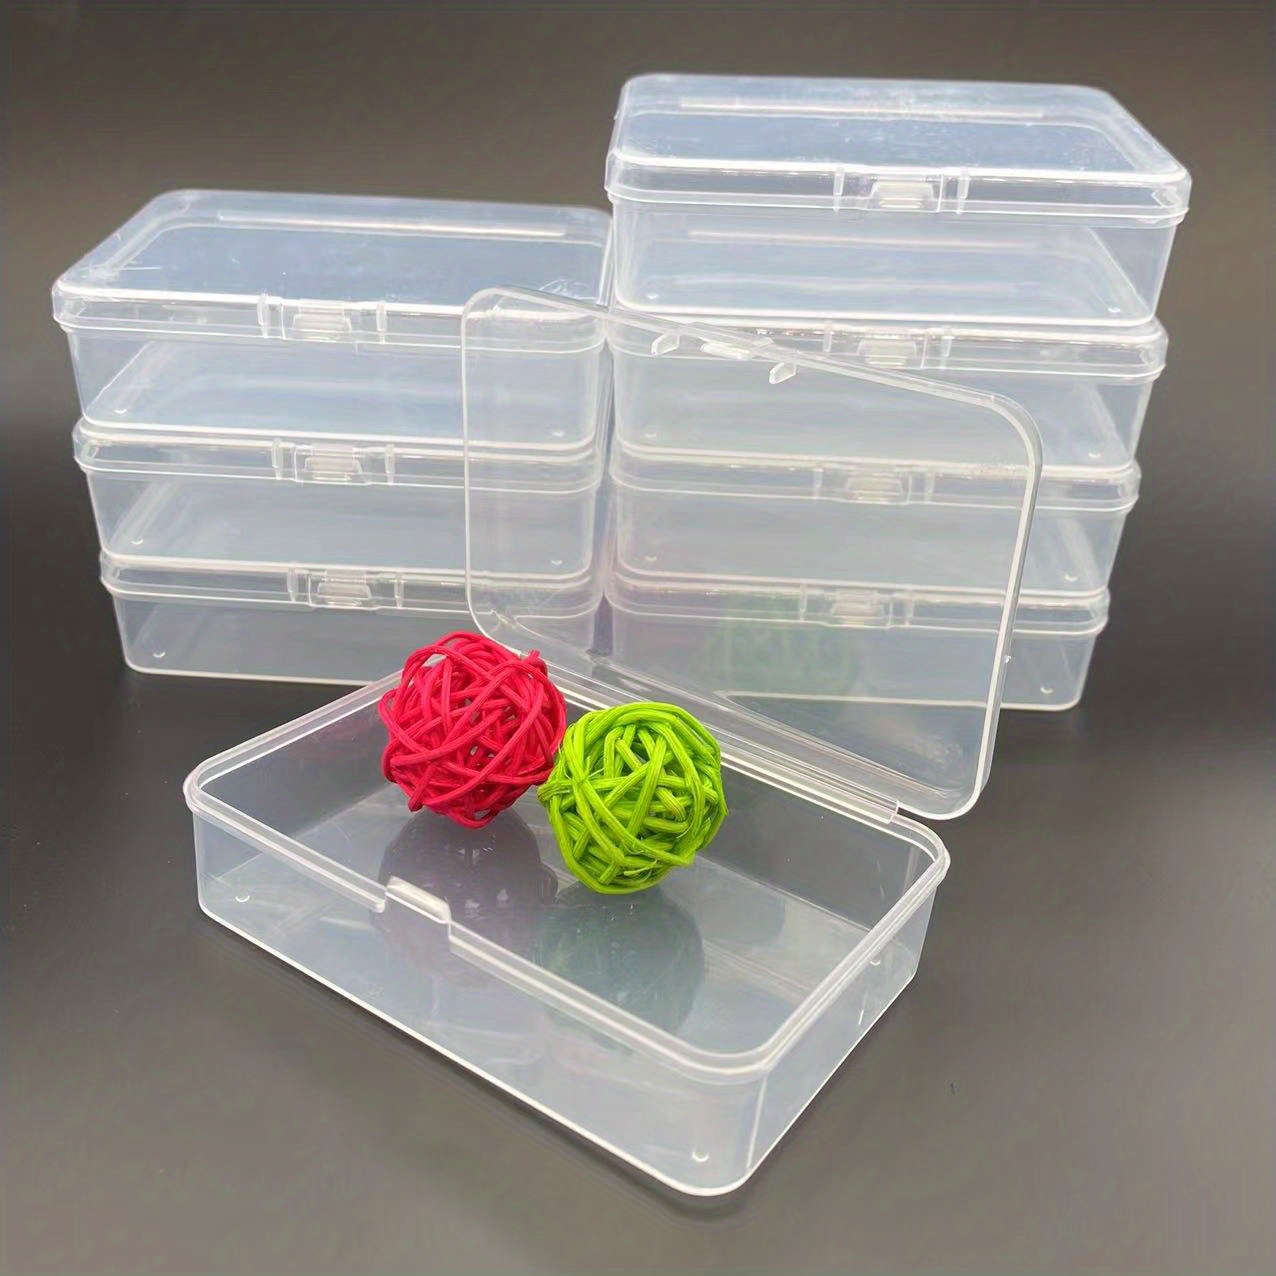 25 Packs Small Square Containers Case Organizer with Hinged Lids Clear  Plastic Beads Storage Box for Jewelry, Pills, Crafts (1.78 1.78 0.8)